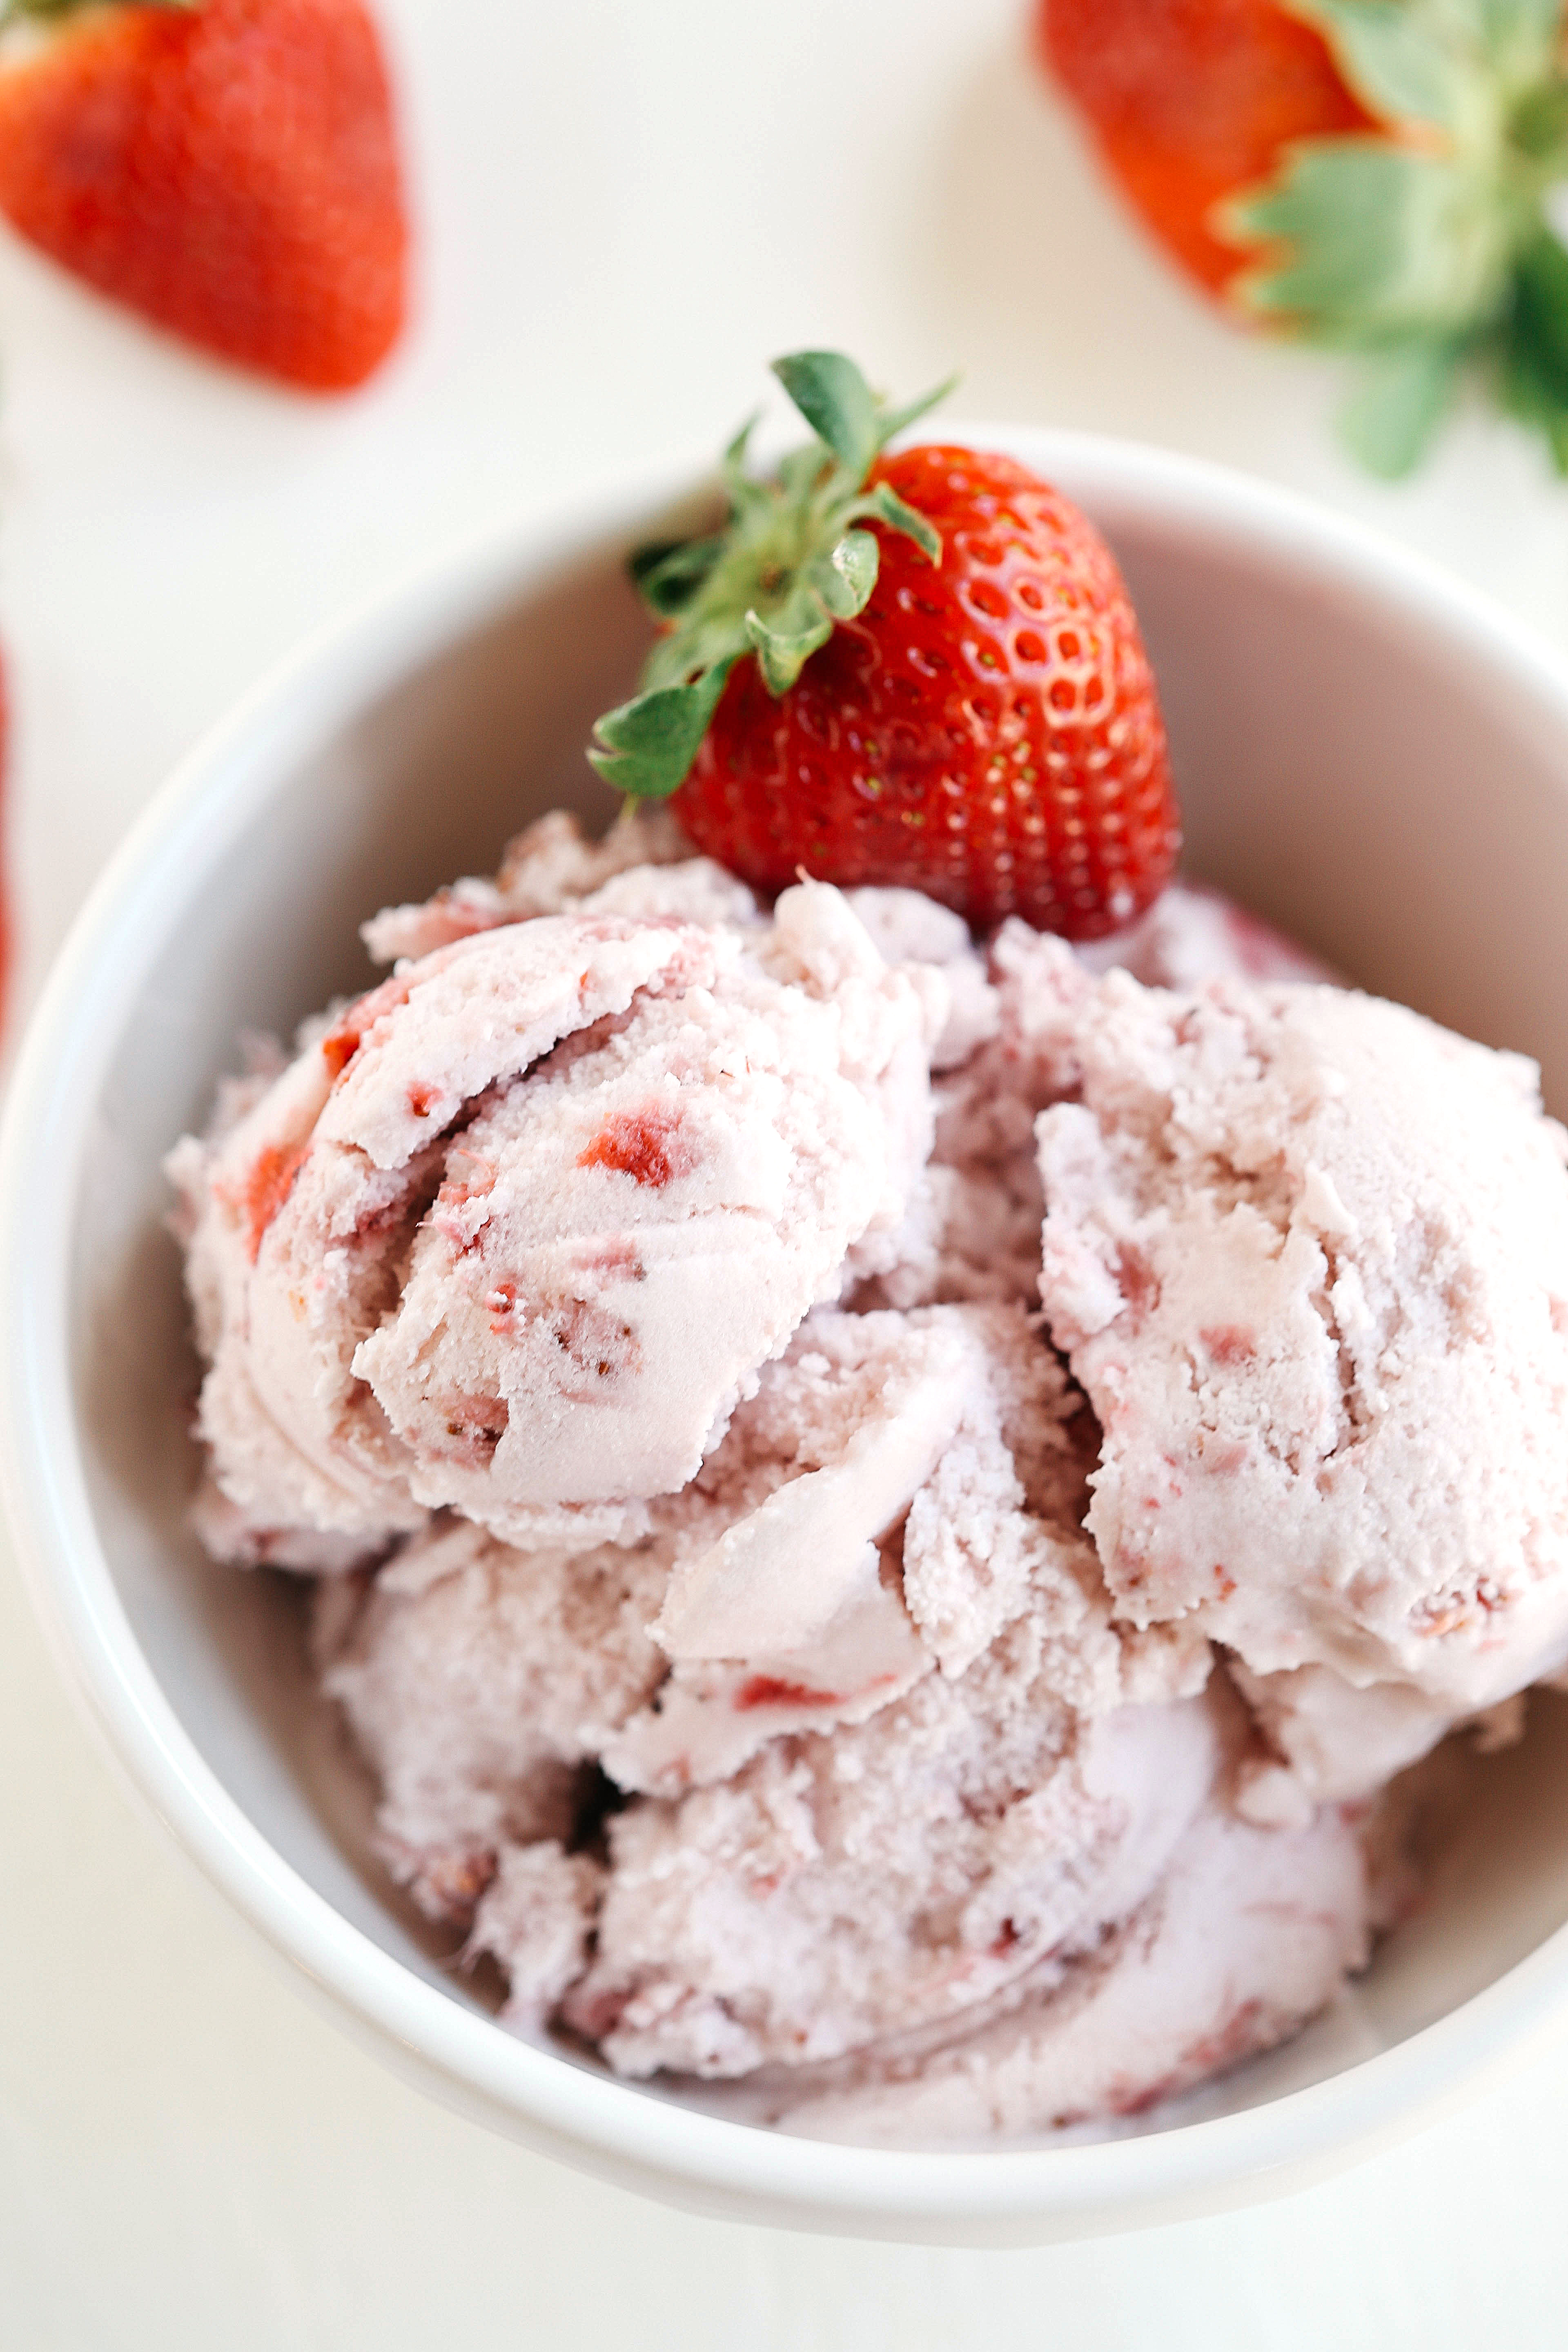 Perfectly sweet and creamy Balsamic Roasted Strawberry Ice Cream that is gluten-free and dairy-free with big chunks of strawberry in every bite!